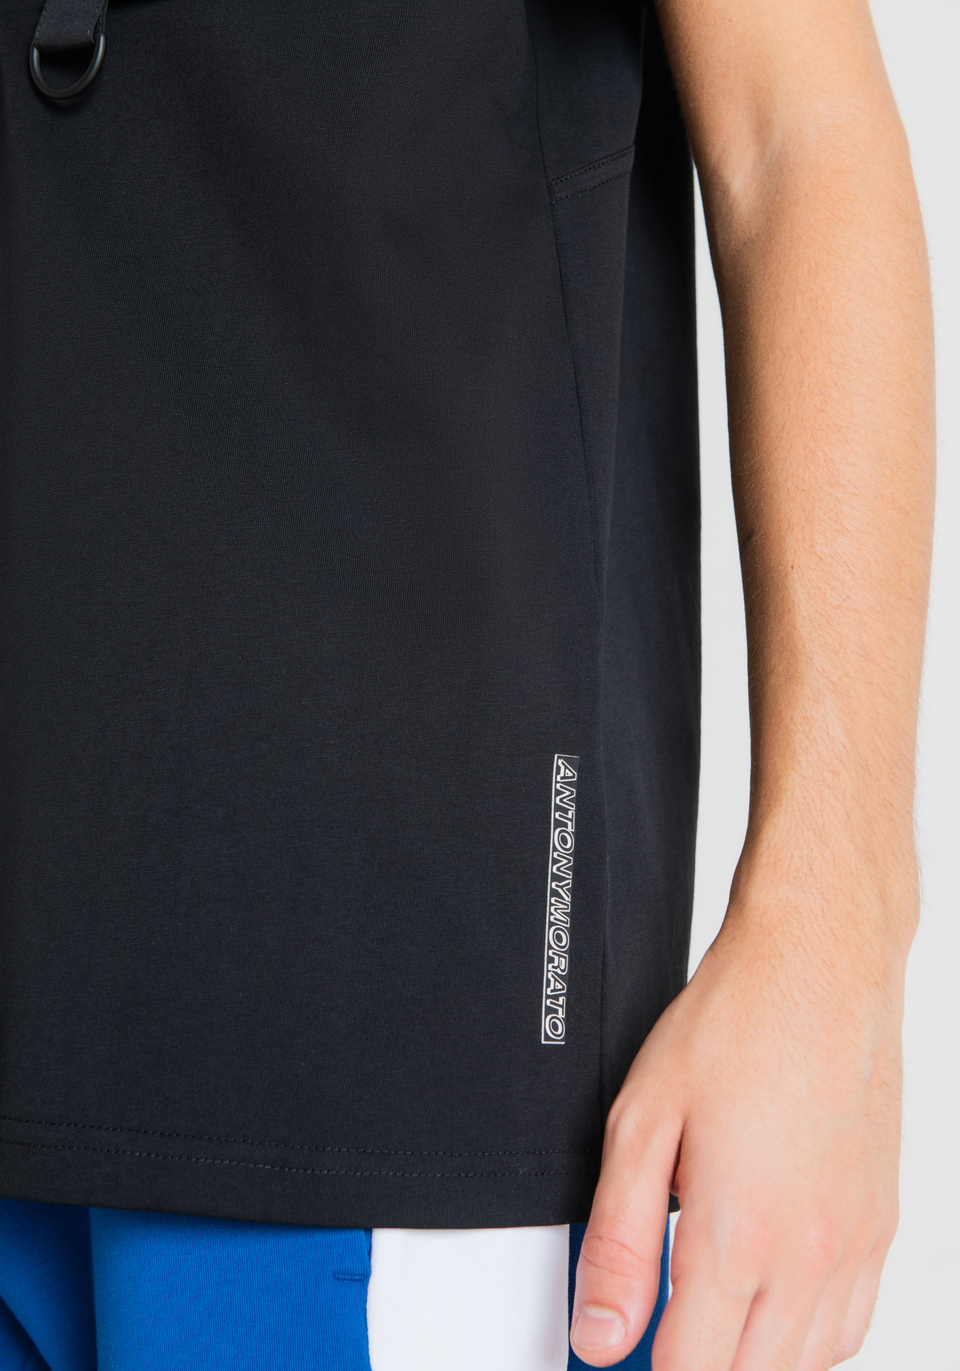 REGULAR FIT T-SHIRT IN 100% COTTON WITH CONTRASTING POCKET - Antony Morato Online Shop